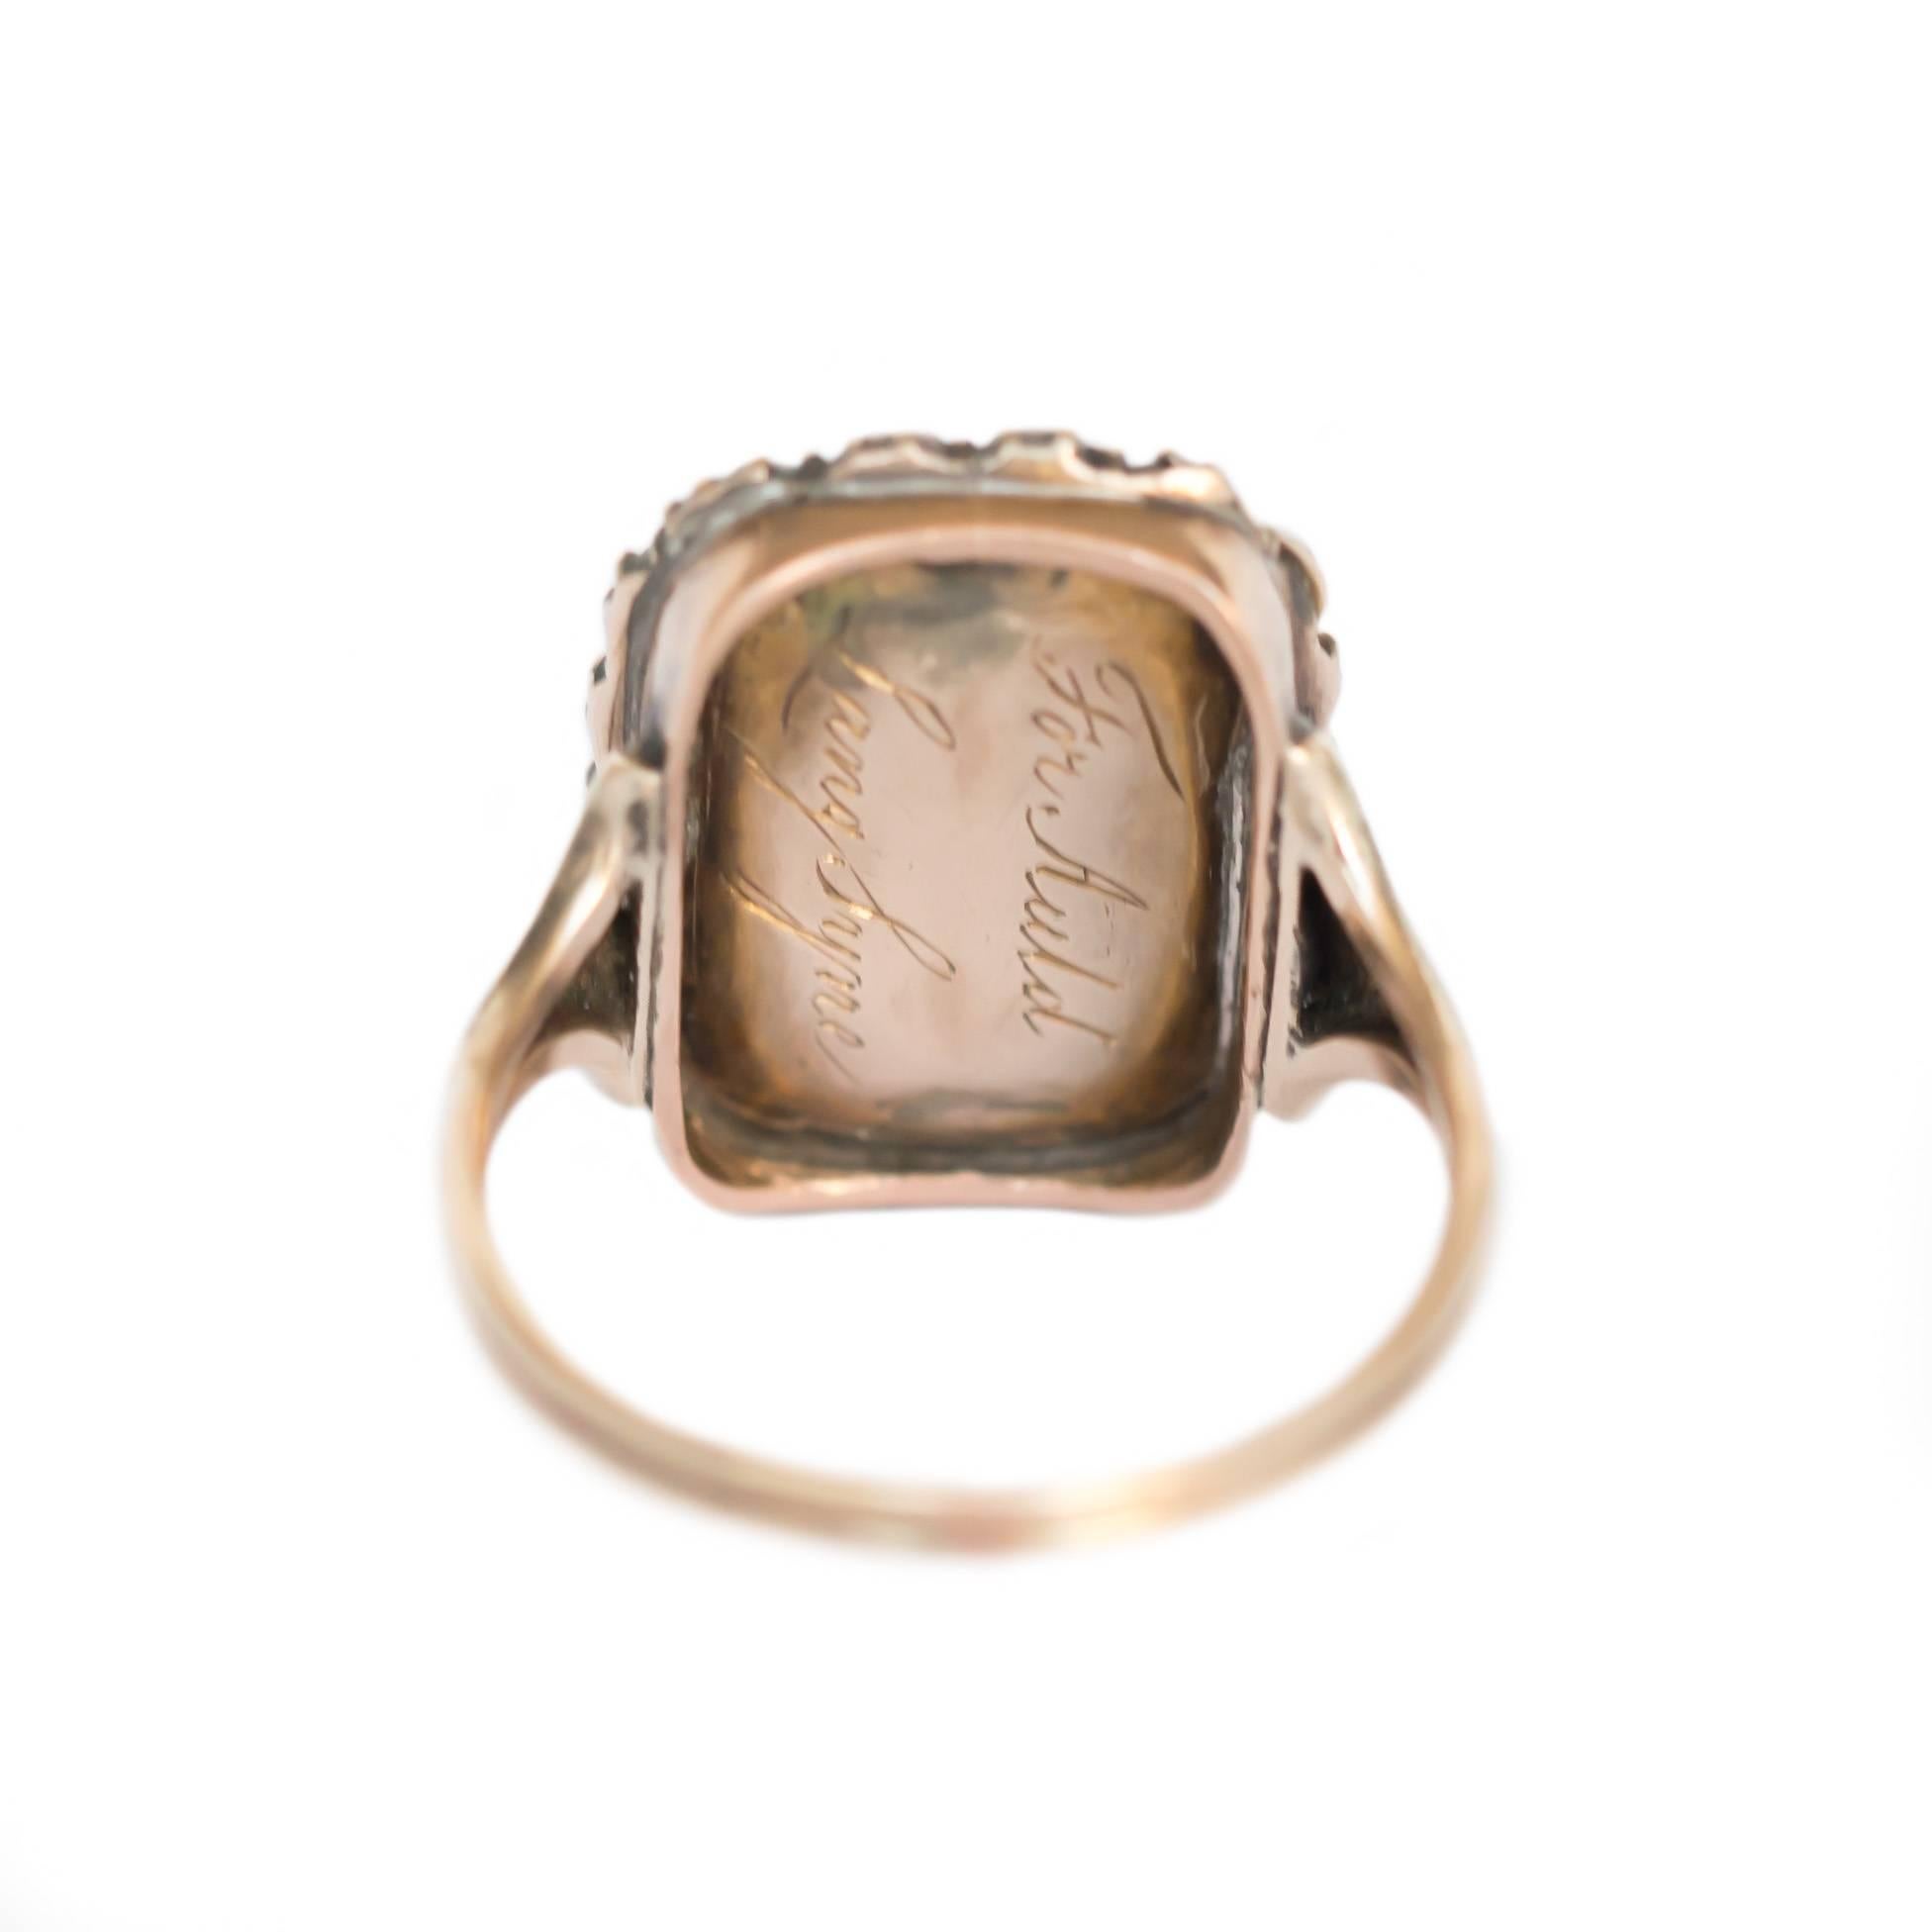 1.00 Carat Total Weight Pearls Yellow Gold Mourning Ring In Excellent Condition For Sale In Atlanta, GA